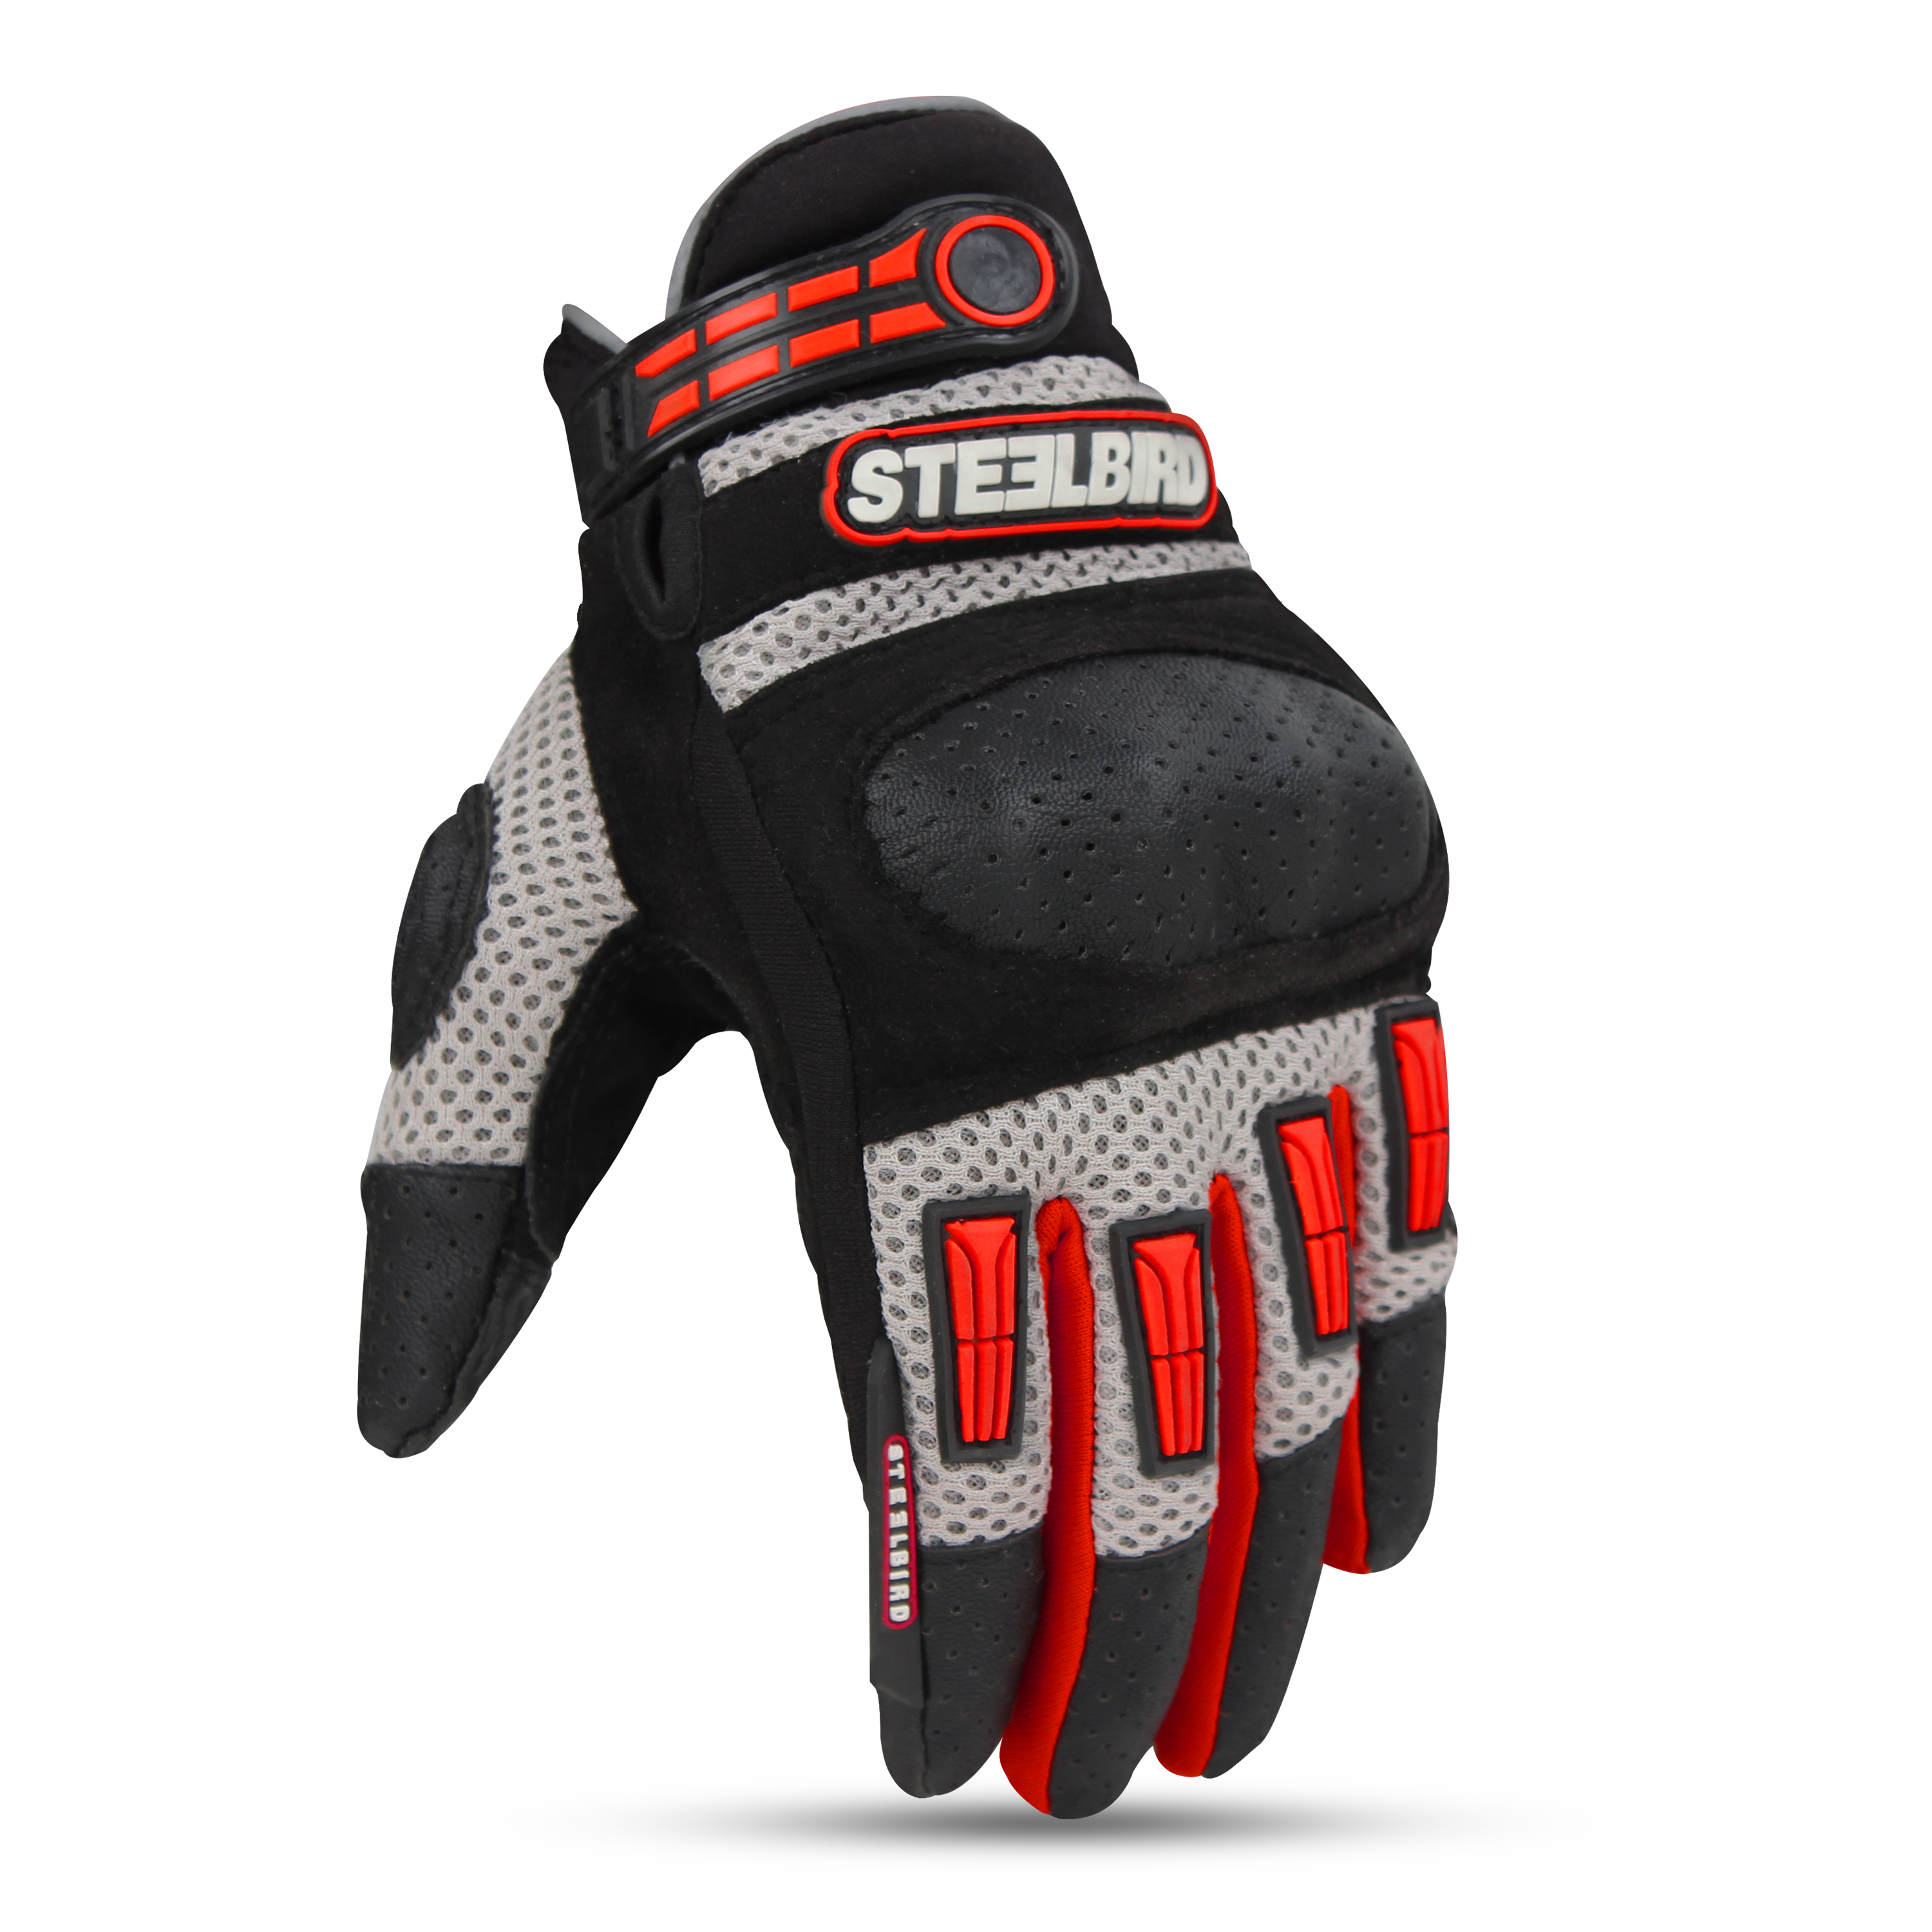 Steelbird Adventure A-1 Full Finger Riding Gloves With Touch Screen Sensitivity At Thumb & Index Finger, Protective Off-Road Motorbike Racing (Red)